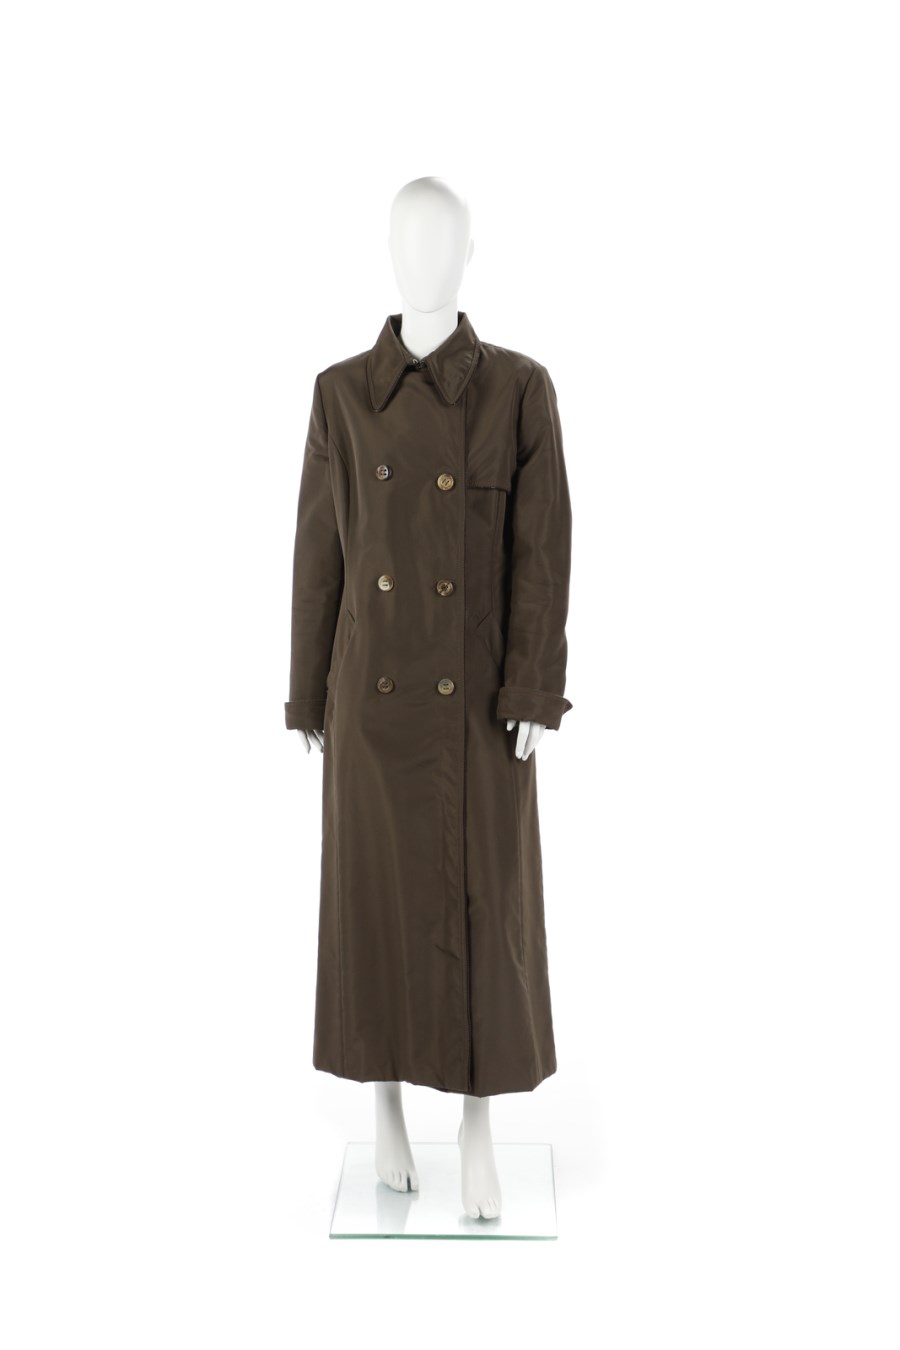 Double-breasted coat in military green silk and wool with leather inserts, belt. (Gianfranco Ferre')